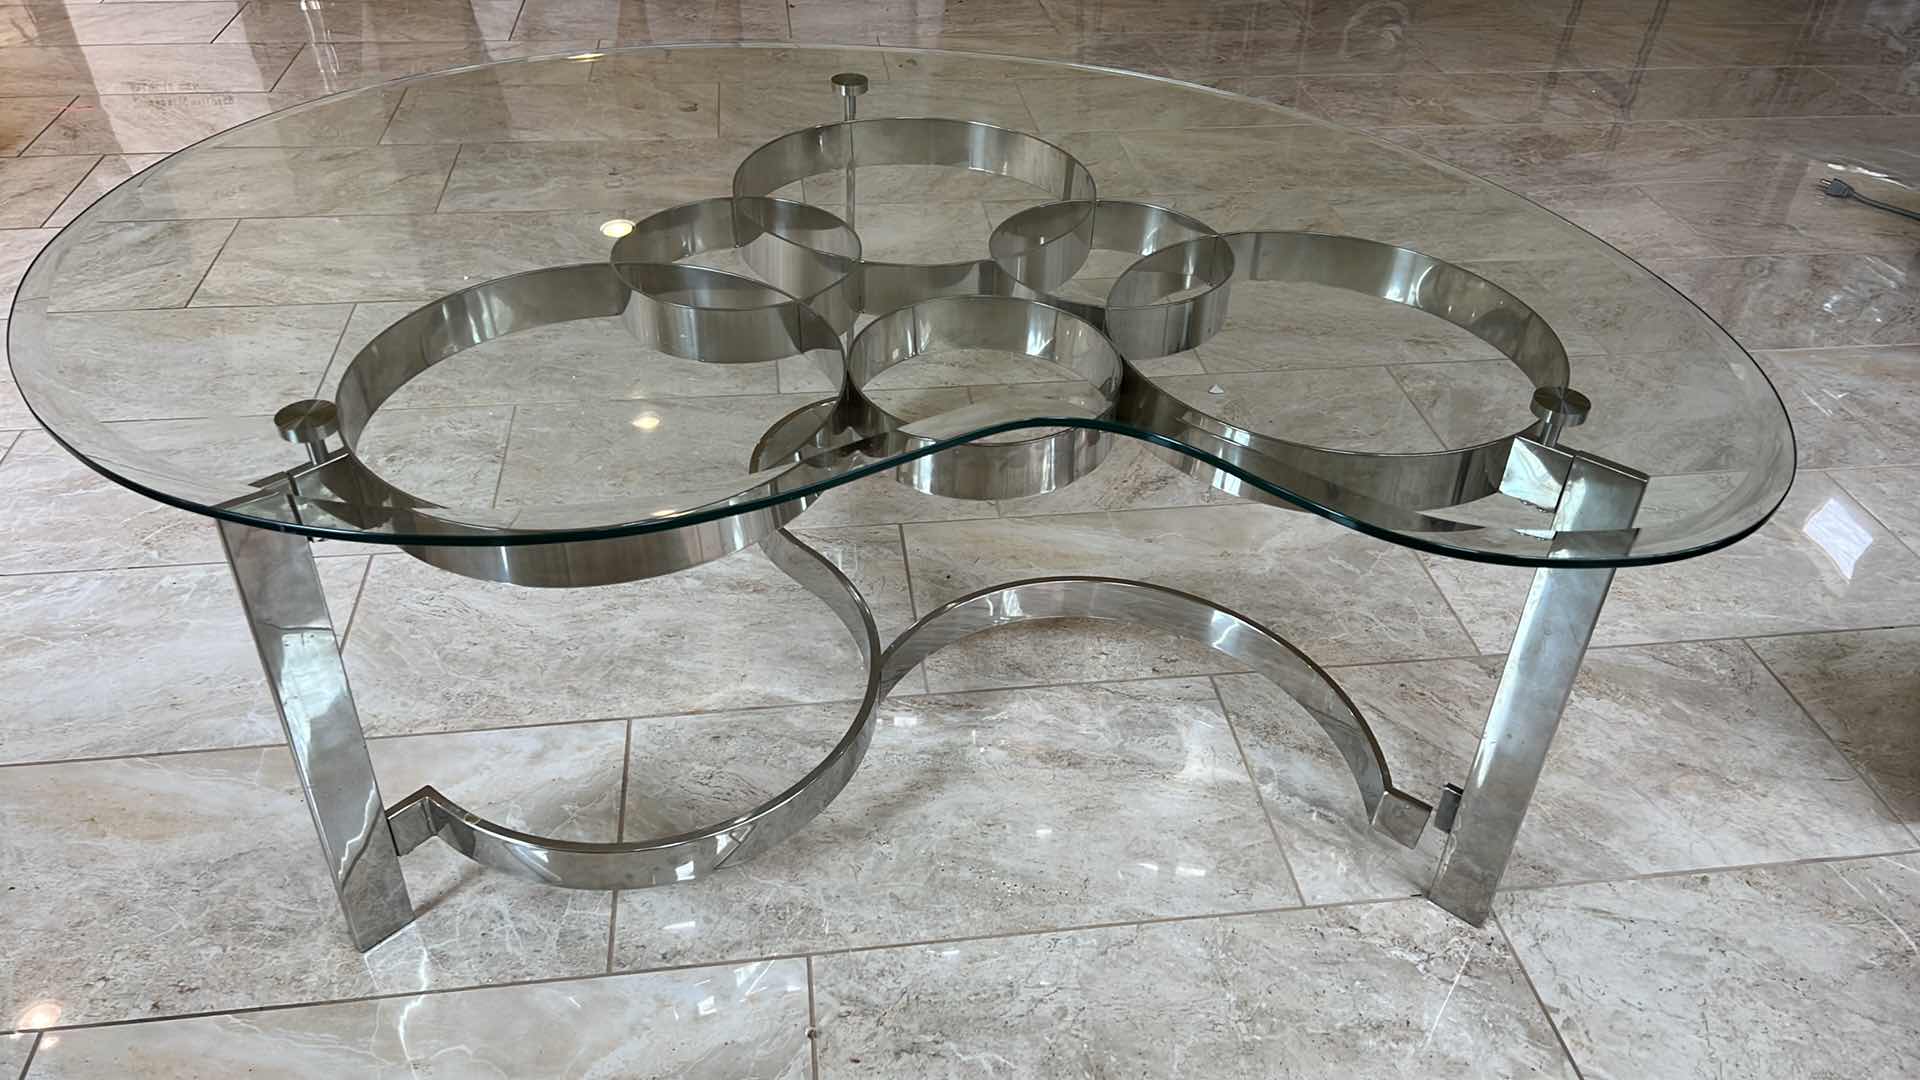 Photo 2 of MODERN SCULPTURED STEEL GLASS AND CHROME COFFEE TABLE 52” x 36” H20”